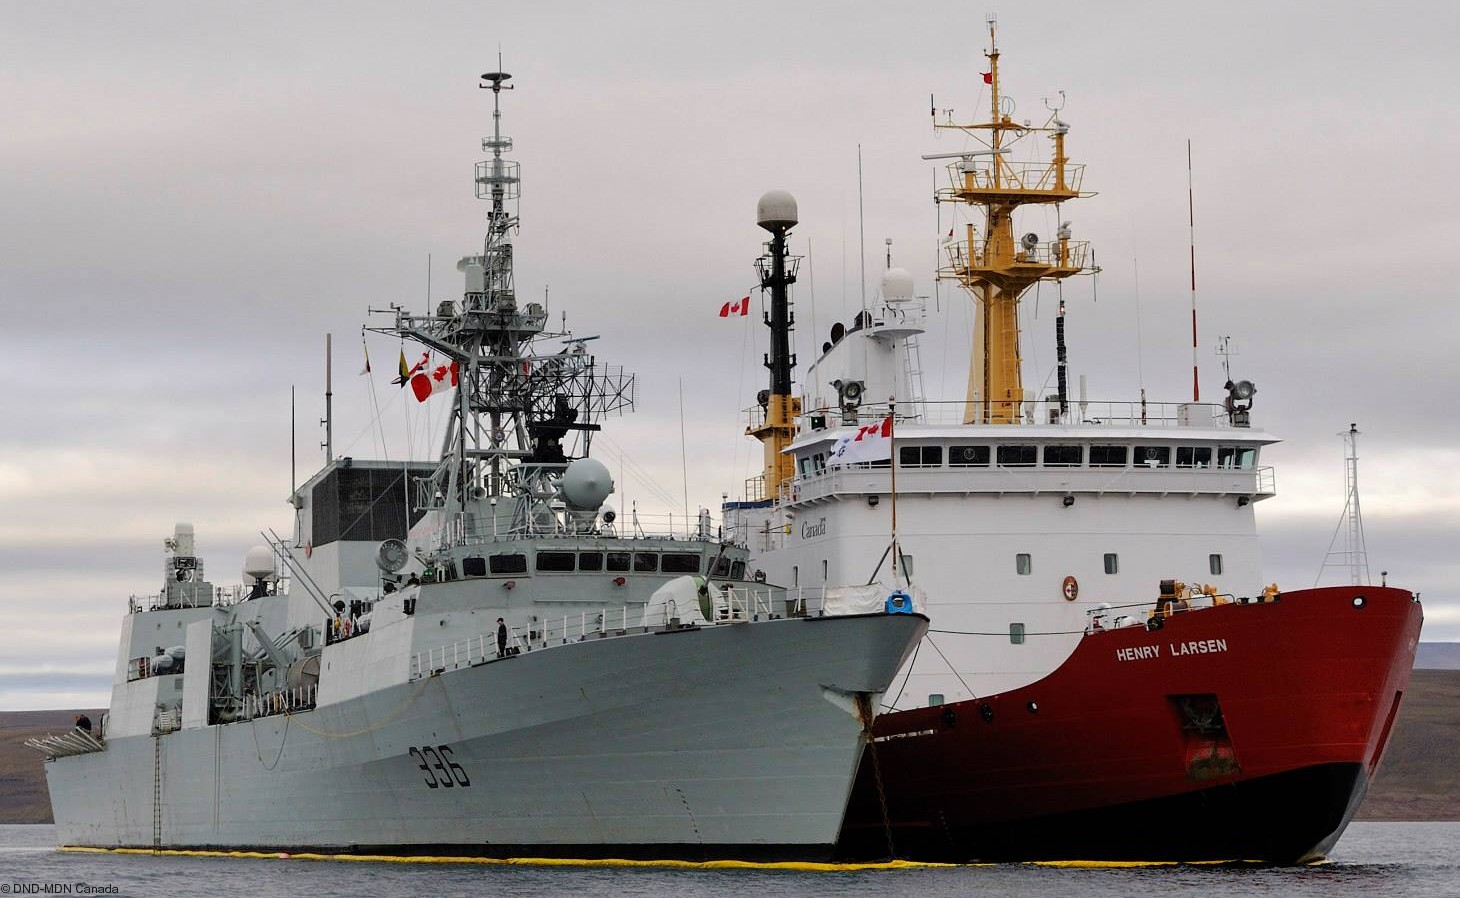 ffh-336 hmcs montreal halifax class helicopter patrol frigate ncsm royal canadian navy 34